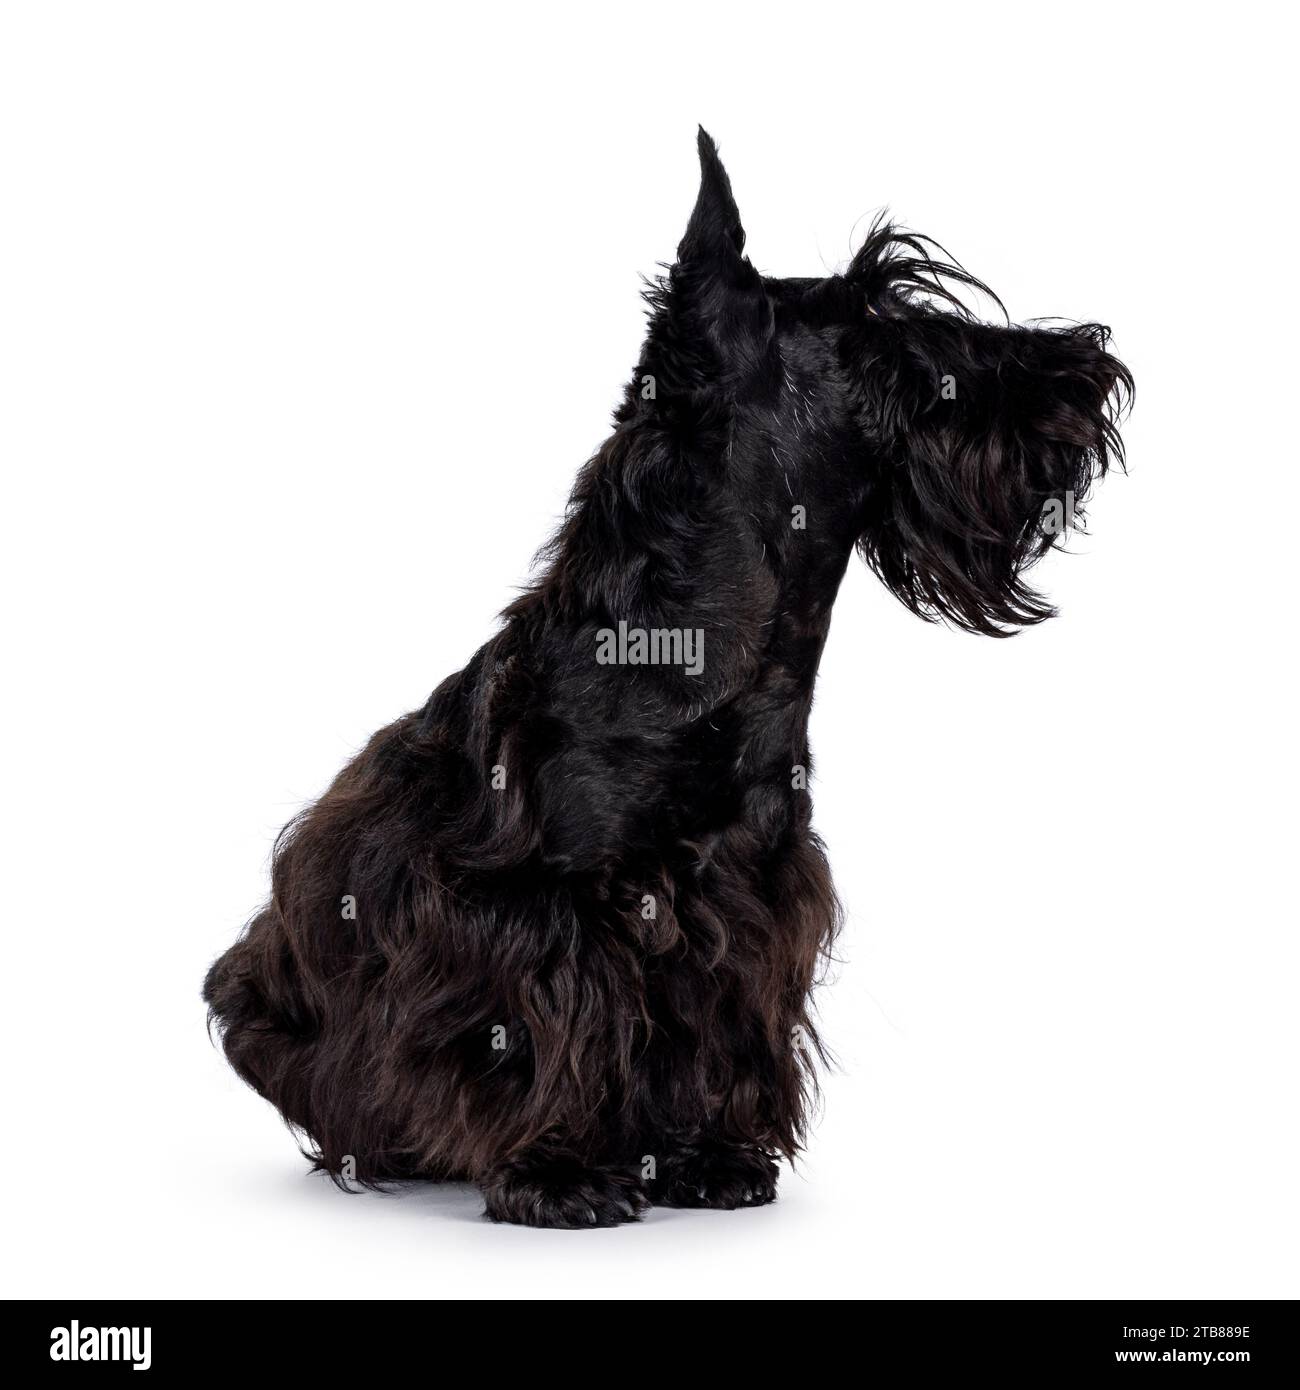 Adorable young solid black Scottish Terrier dog, sitting up side ways. Ears eract, mouth closed and looking away from camera showing profile. Isolated Stock Photo